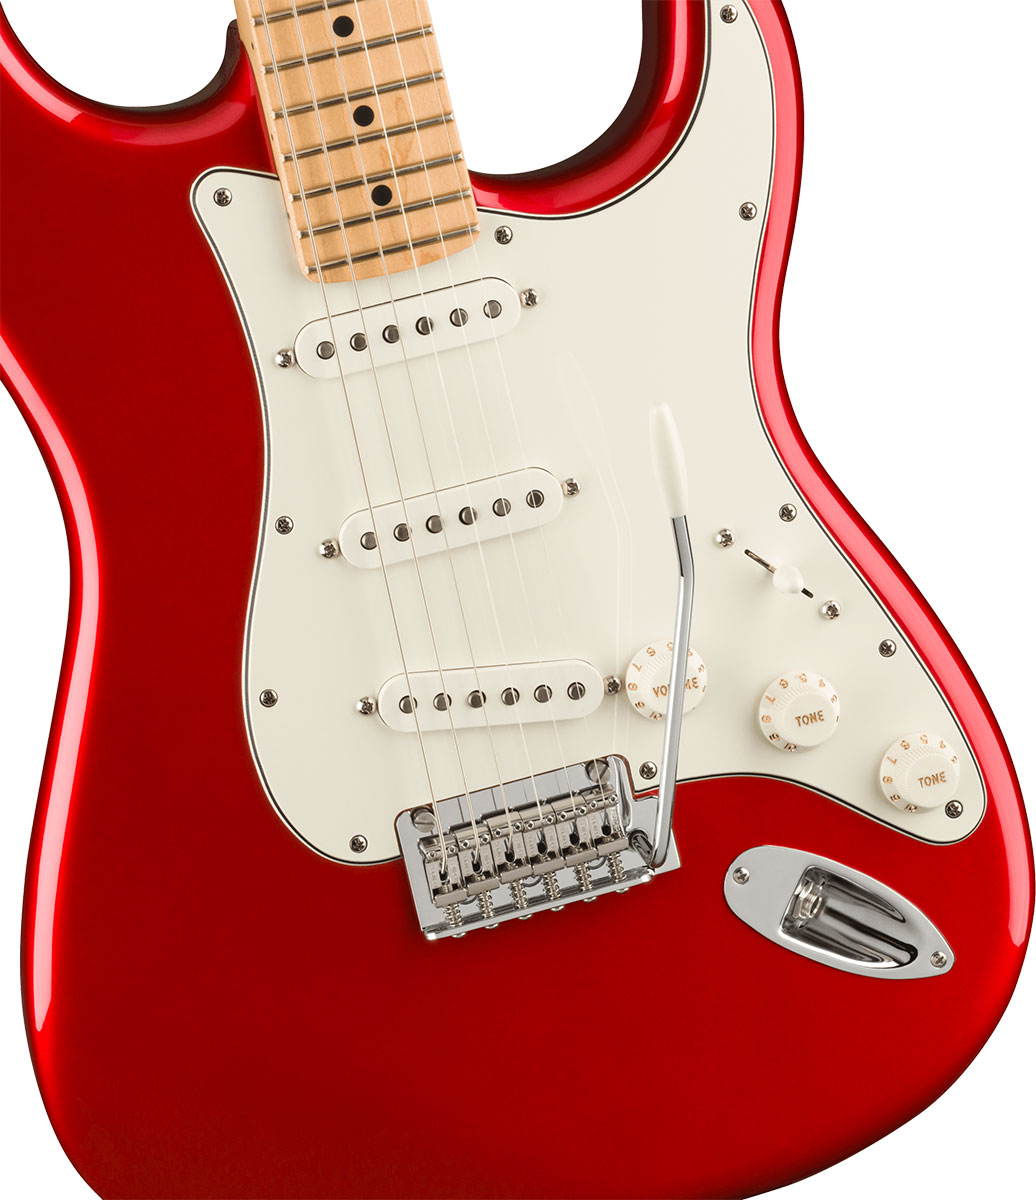 Fender Player Stratocaster Candy Apple Red エレキギター ストラト 